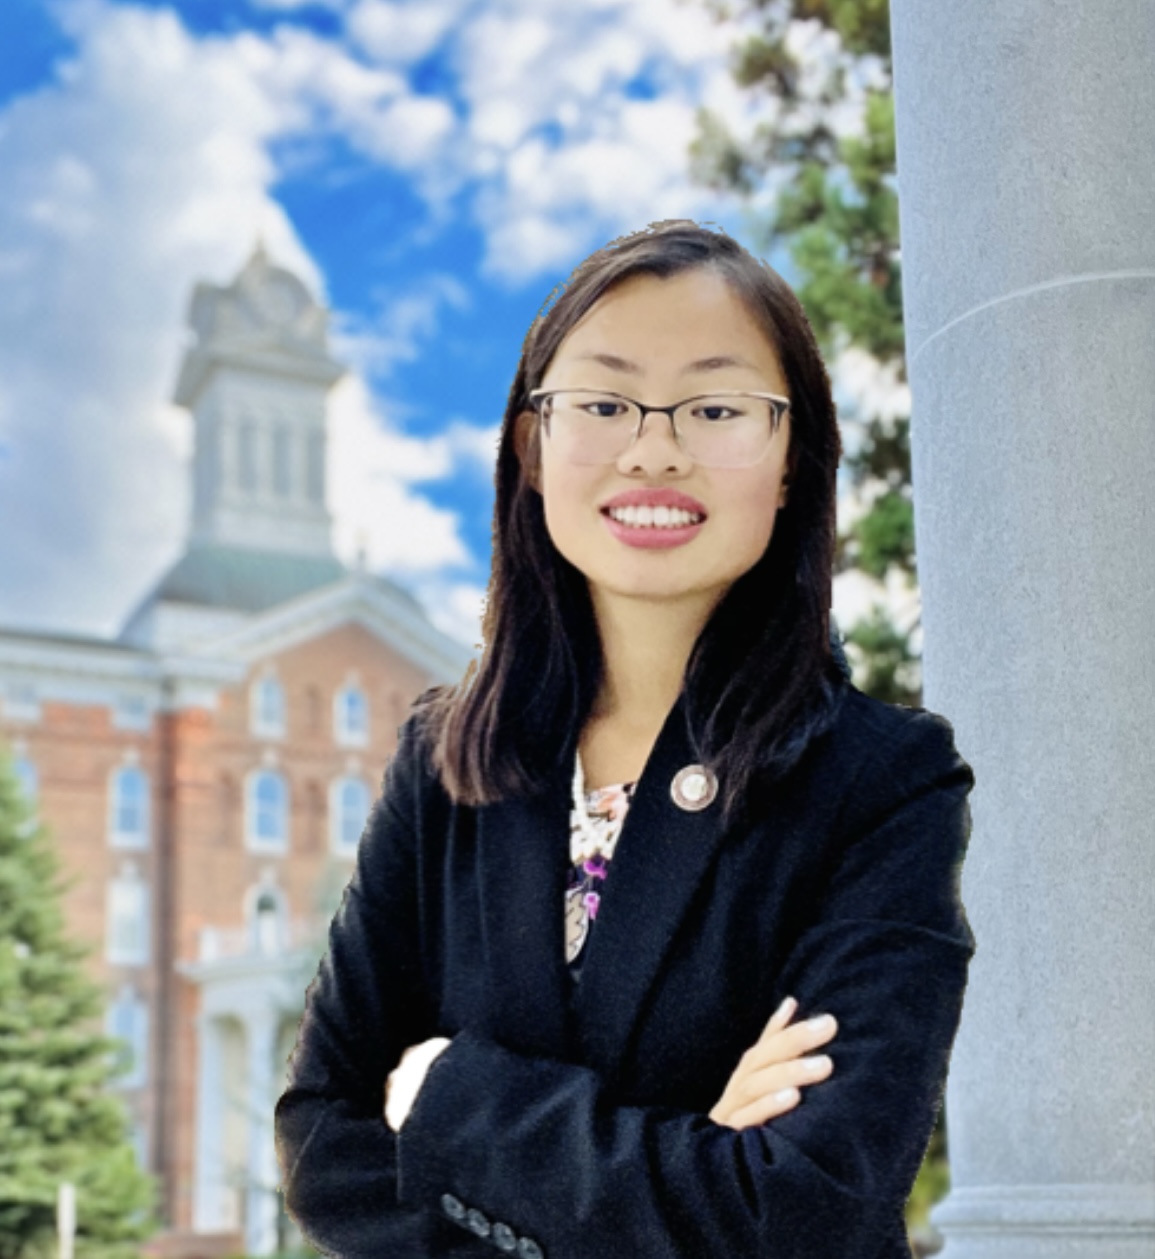 Photo of student Elizabeth Kolb in front of Old Main clock tower.